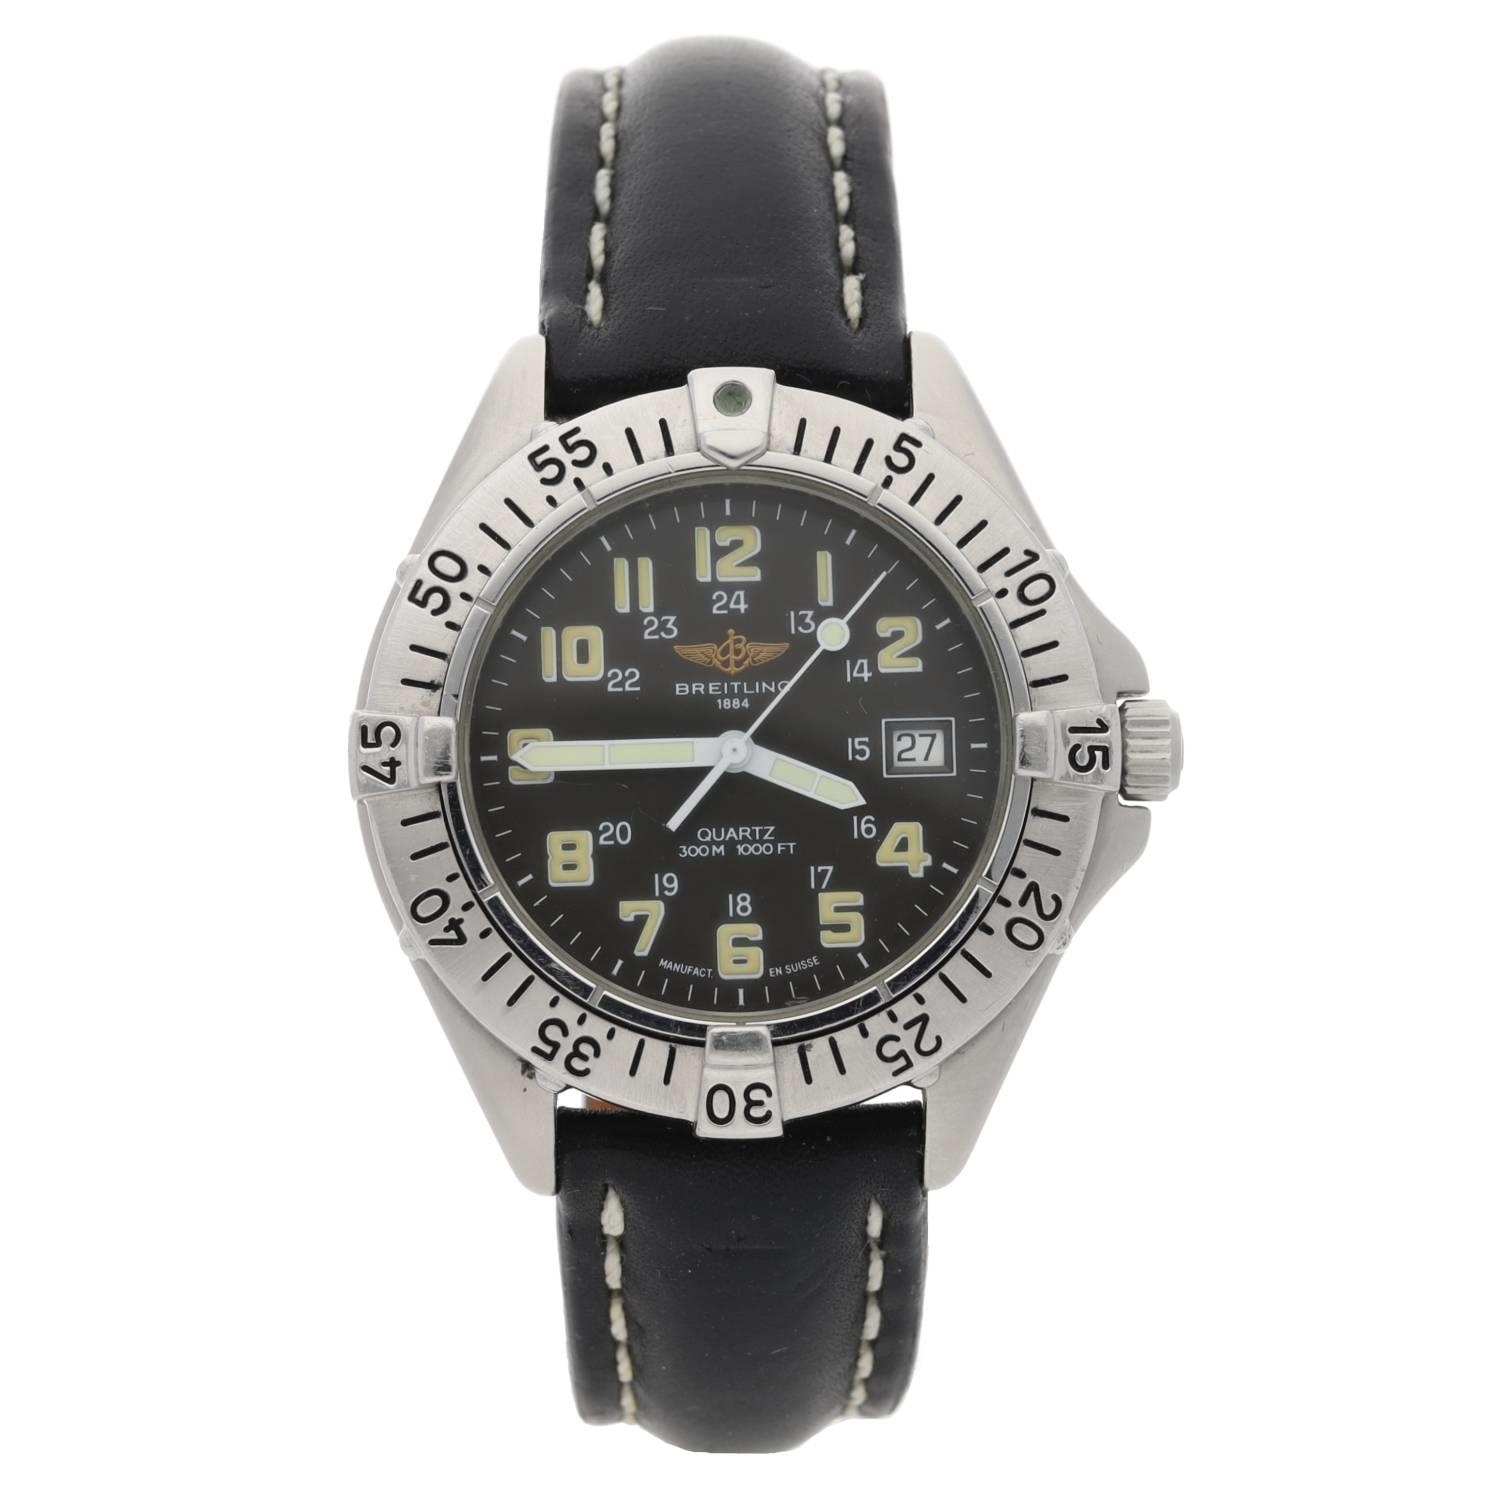 Breitling Colt Quartz stainless steel gentleman's wristwatch, reference no. A57035, serial no. - Image 2 of 4